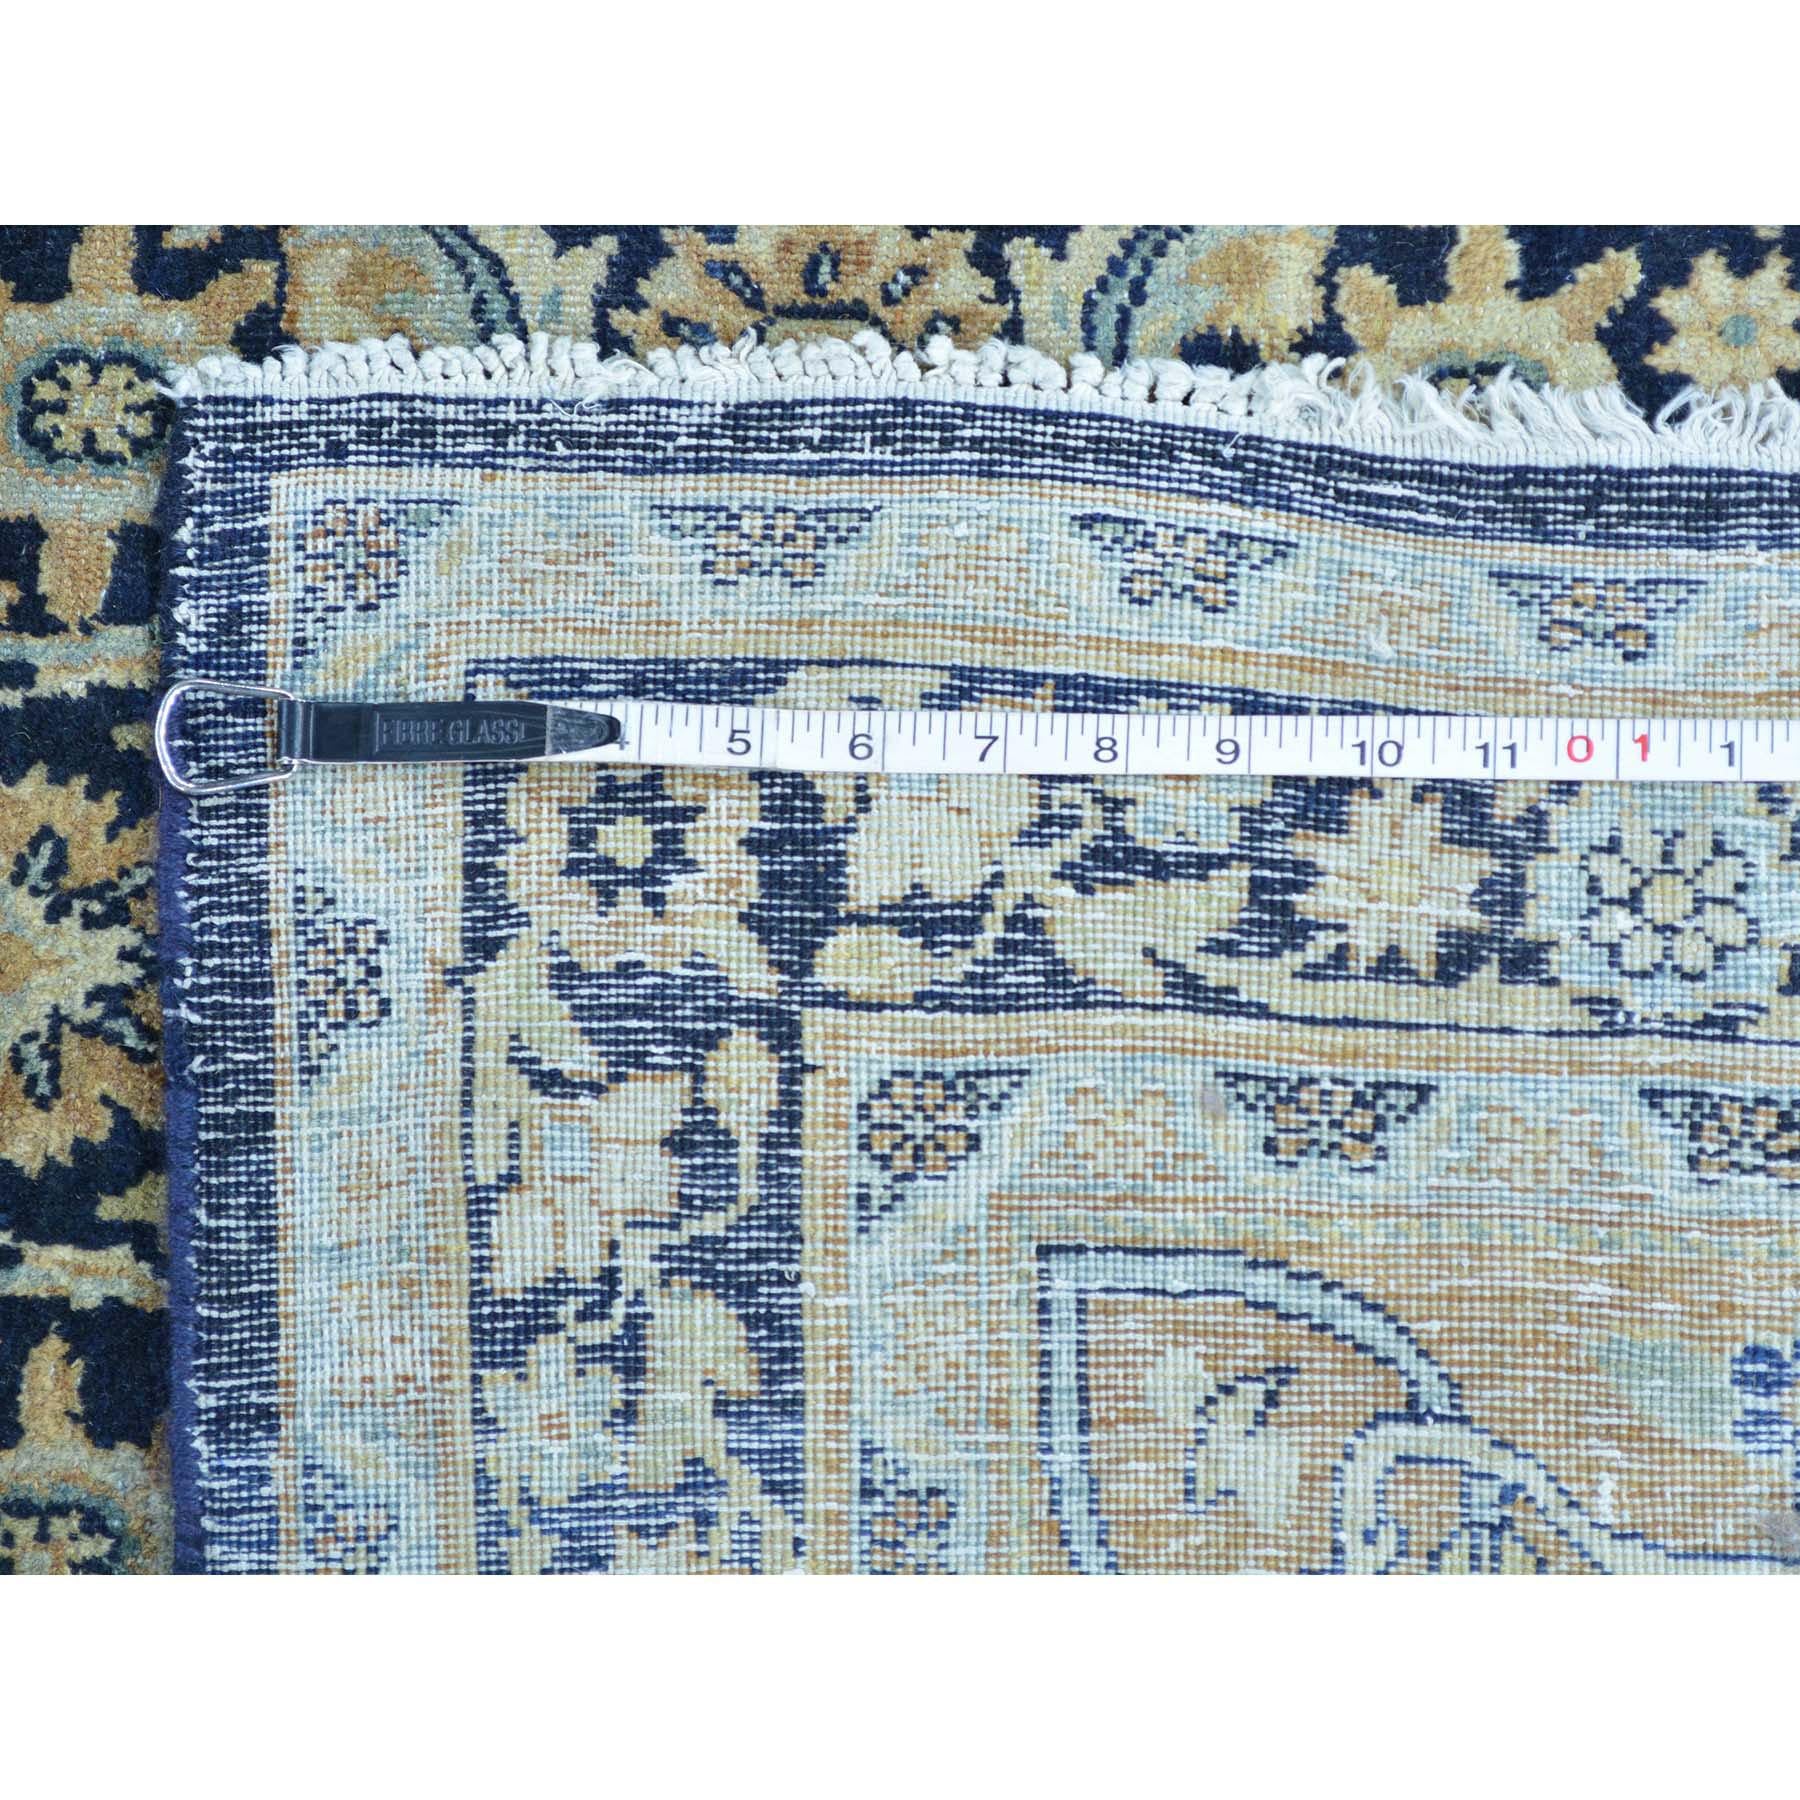 Gallery Size Antique Persian Kerman Herati Design Rug In Good Condition For Sale In Carlstadt, NJ